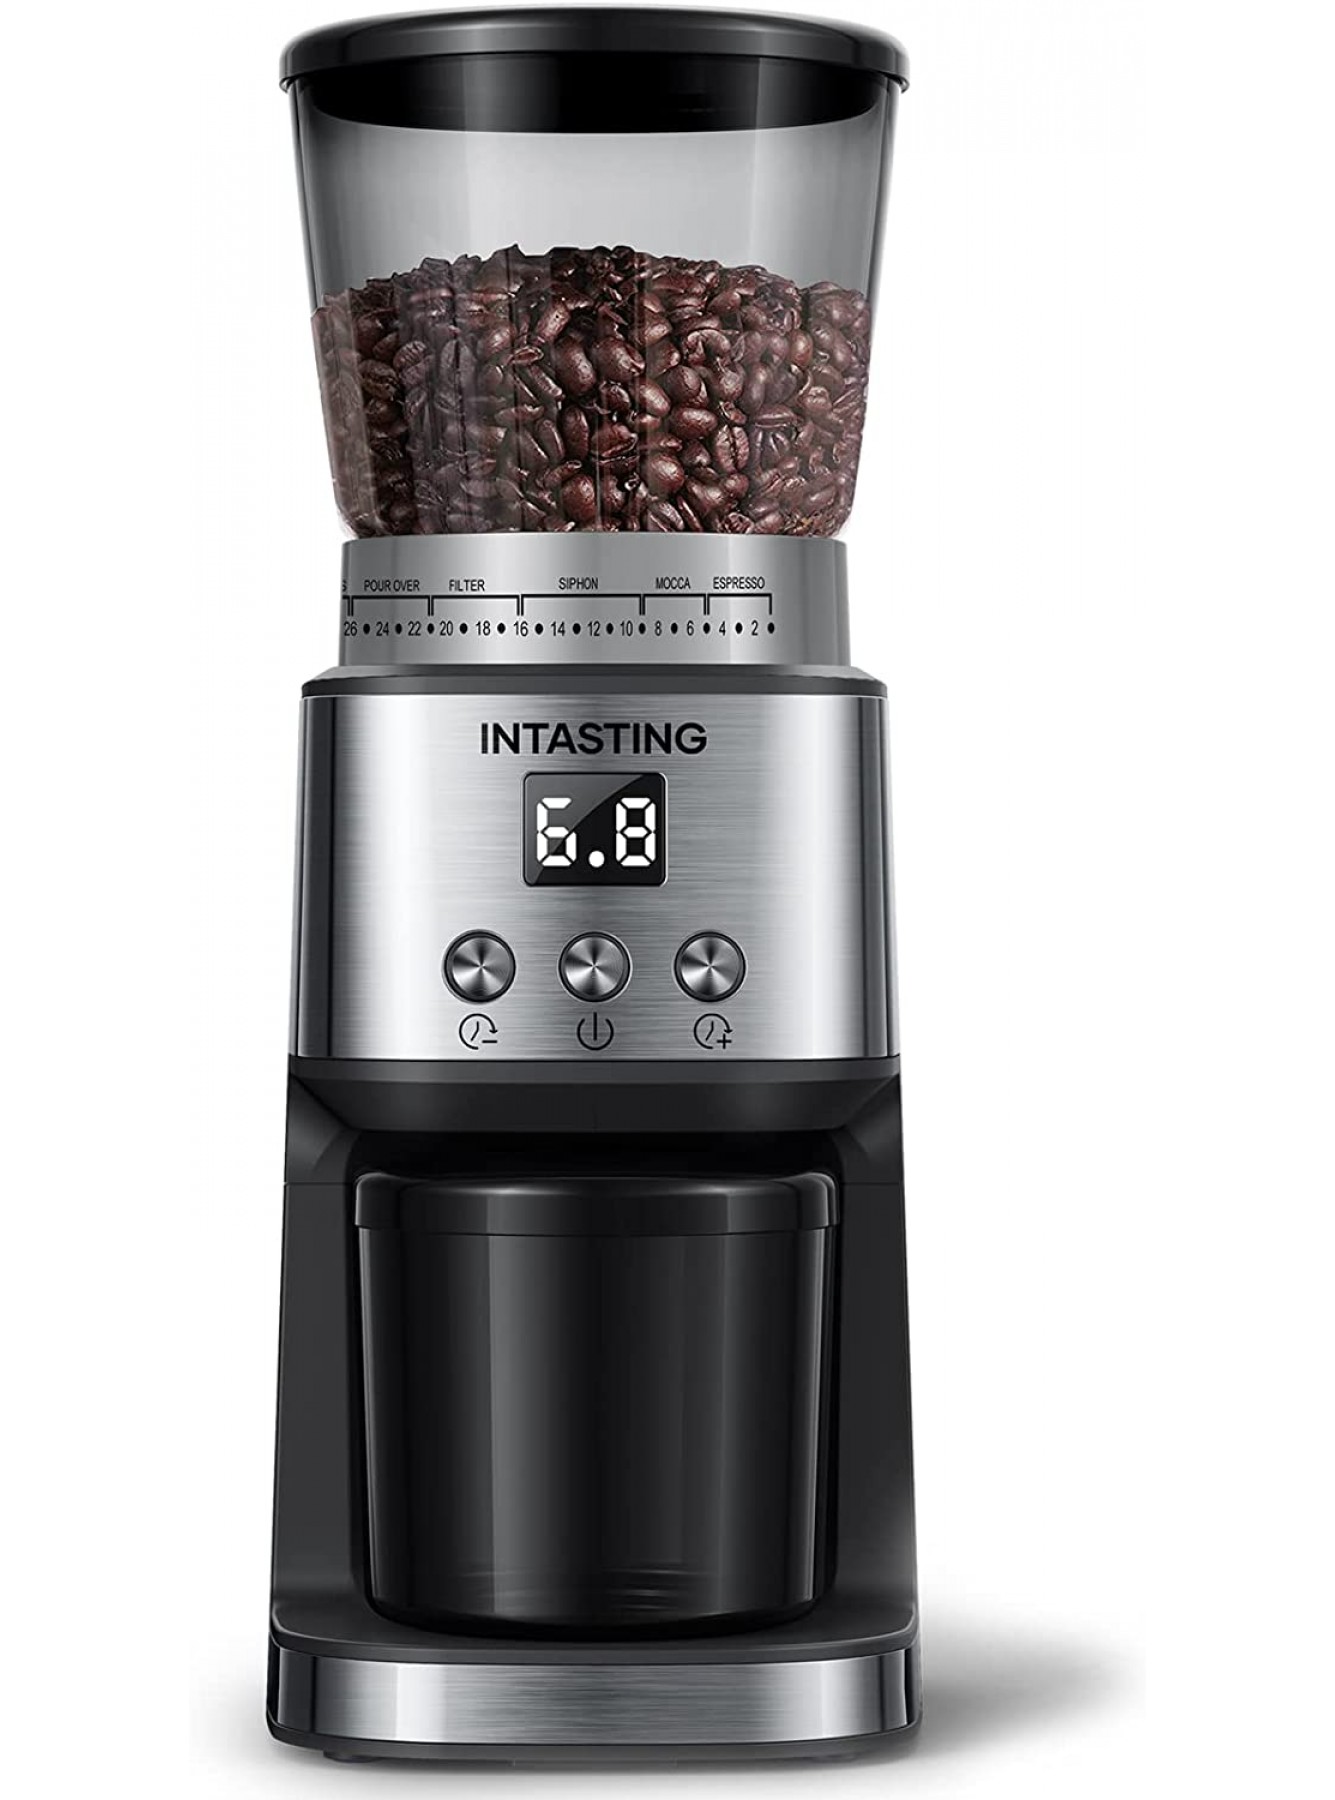 https://www.instagramscraperapi.com/image/cache/data/category_78/intasting-burr-coffee-grinder-coffee-grinder-electric-with-31-precise-grind-settings-3909-1335x1800.jpg